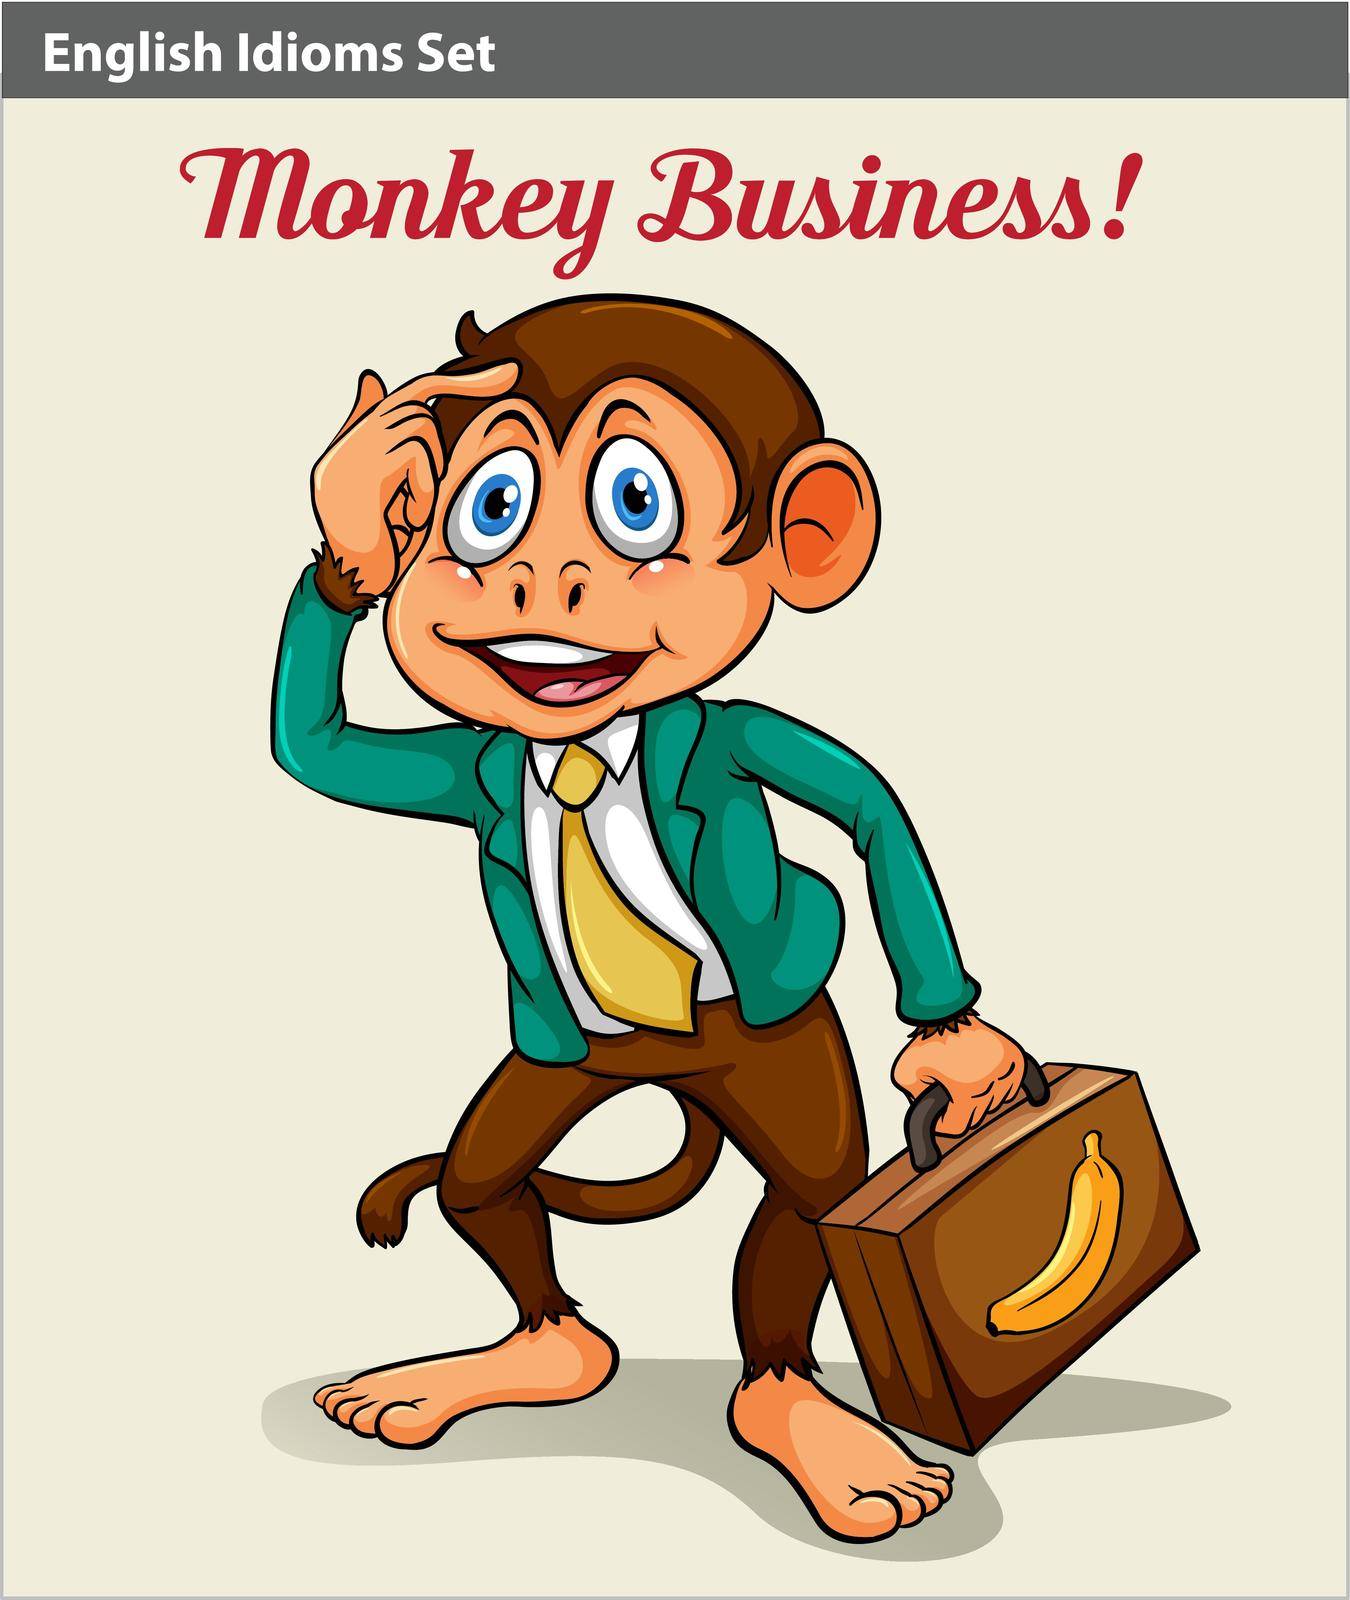 An idiom showing a monkey business